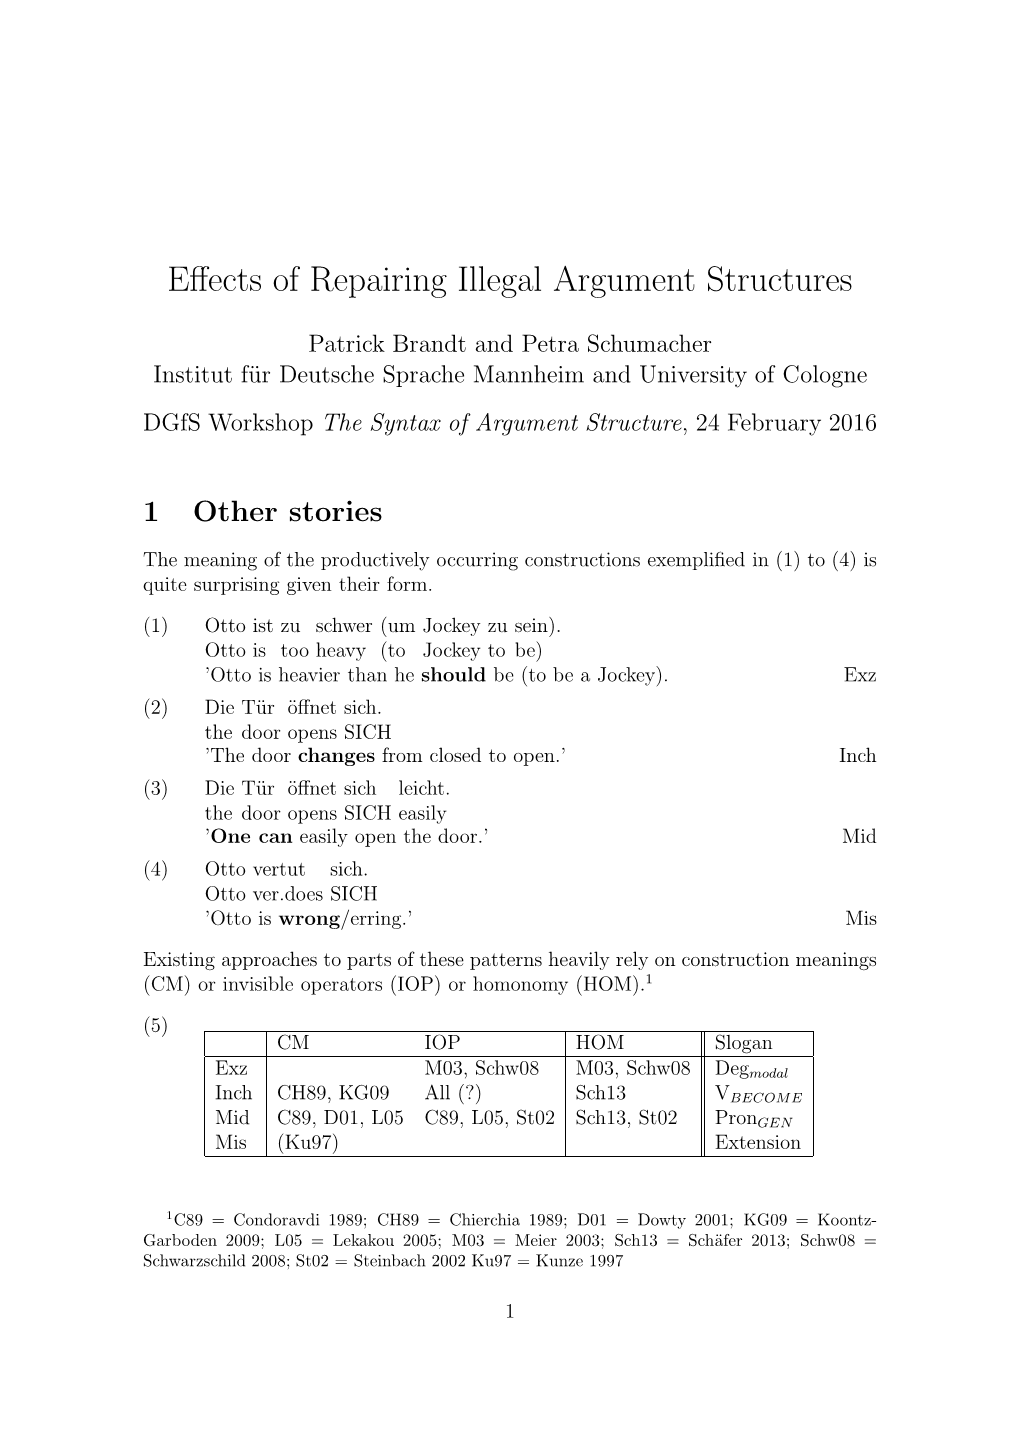 Effects of Repairing Illegal Argument Structures